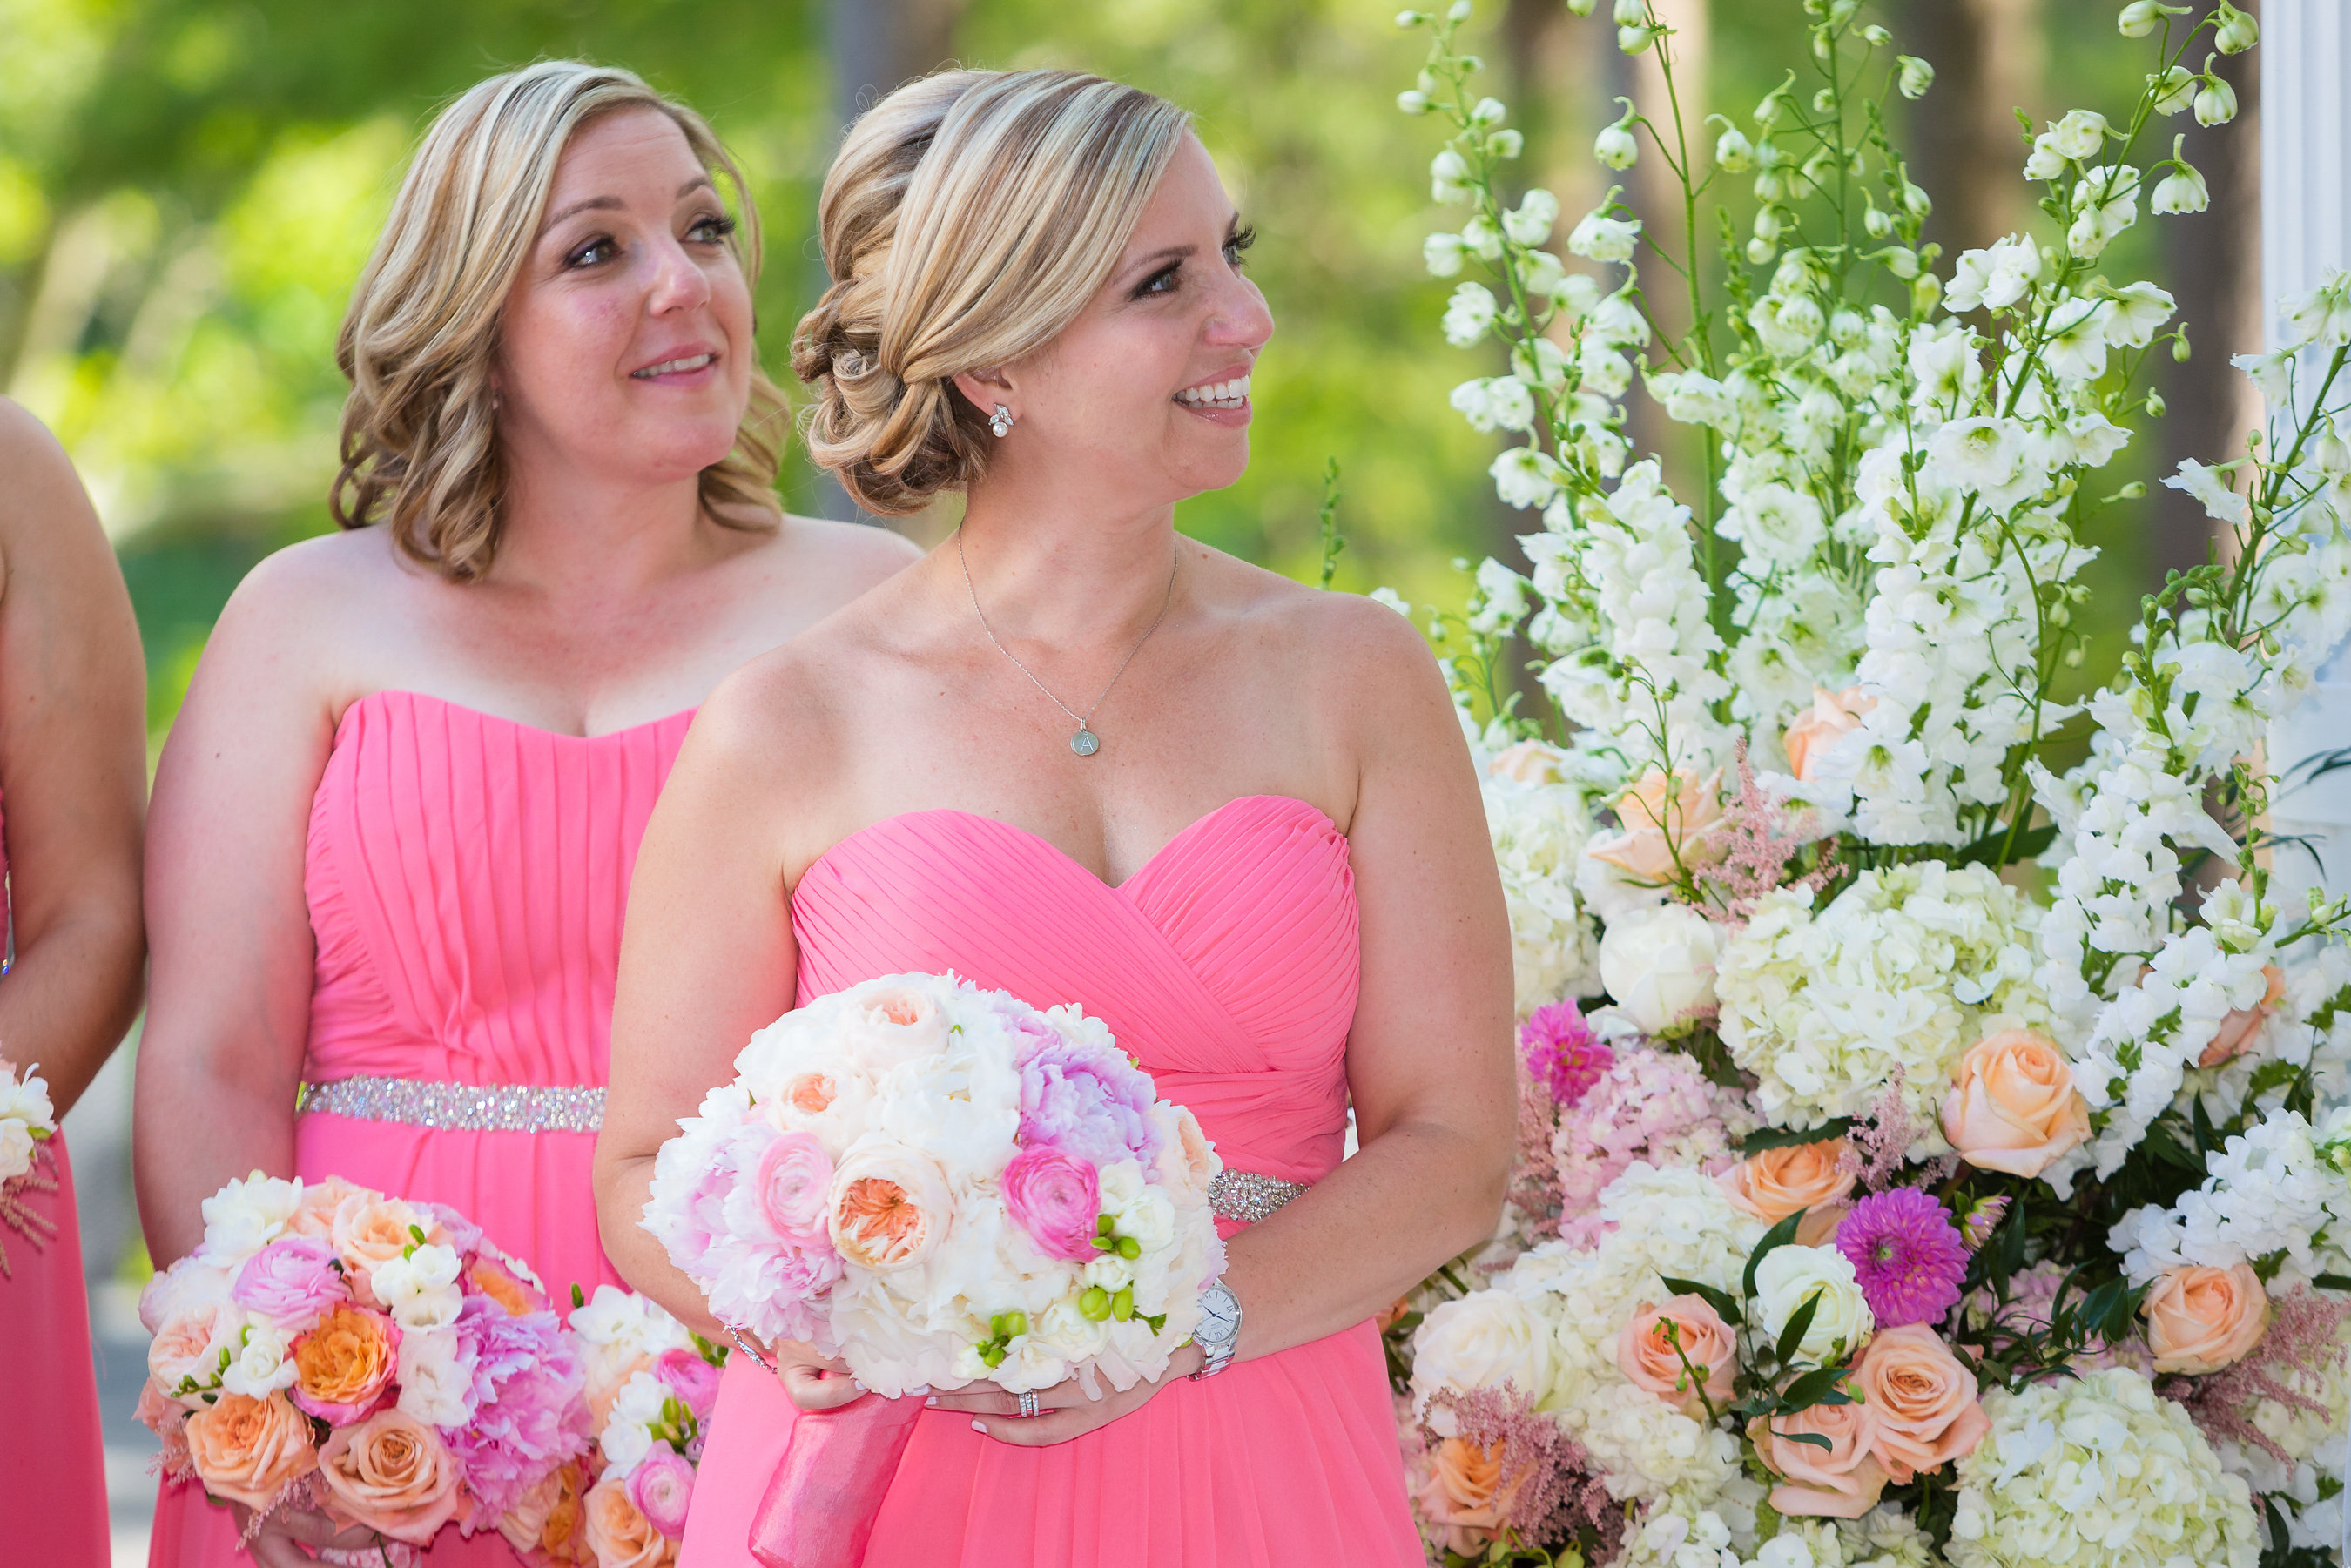 Bridemaids wearing pink dresses surrounded by a floral display at the ceremony